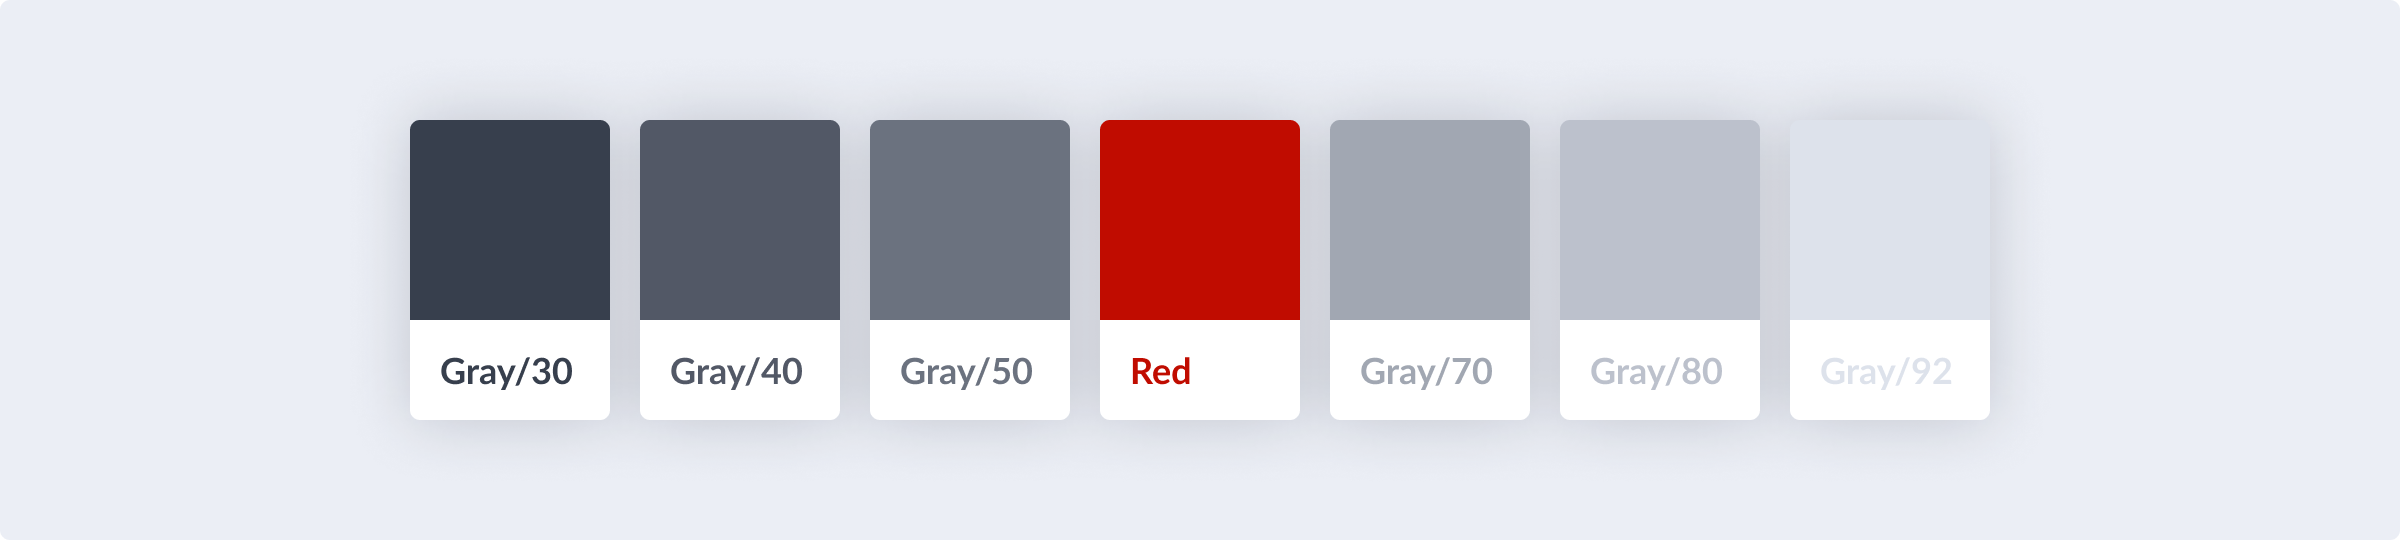 hunter-brand-foundation-color-overview.png